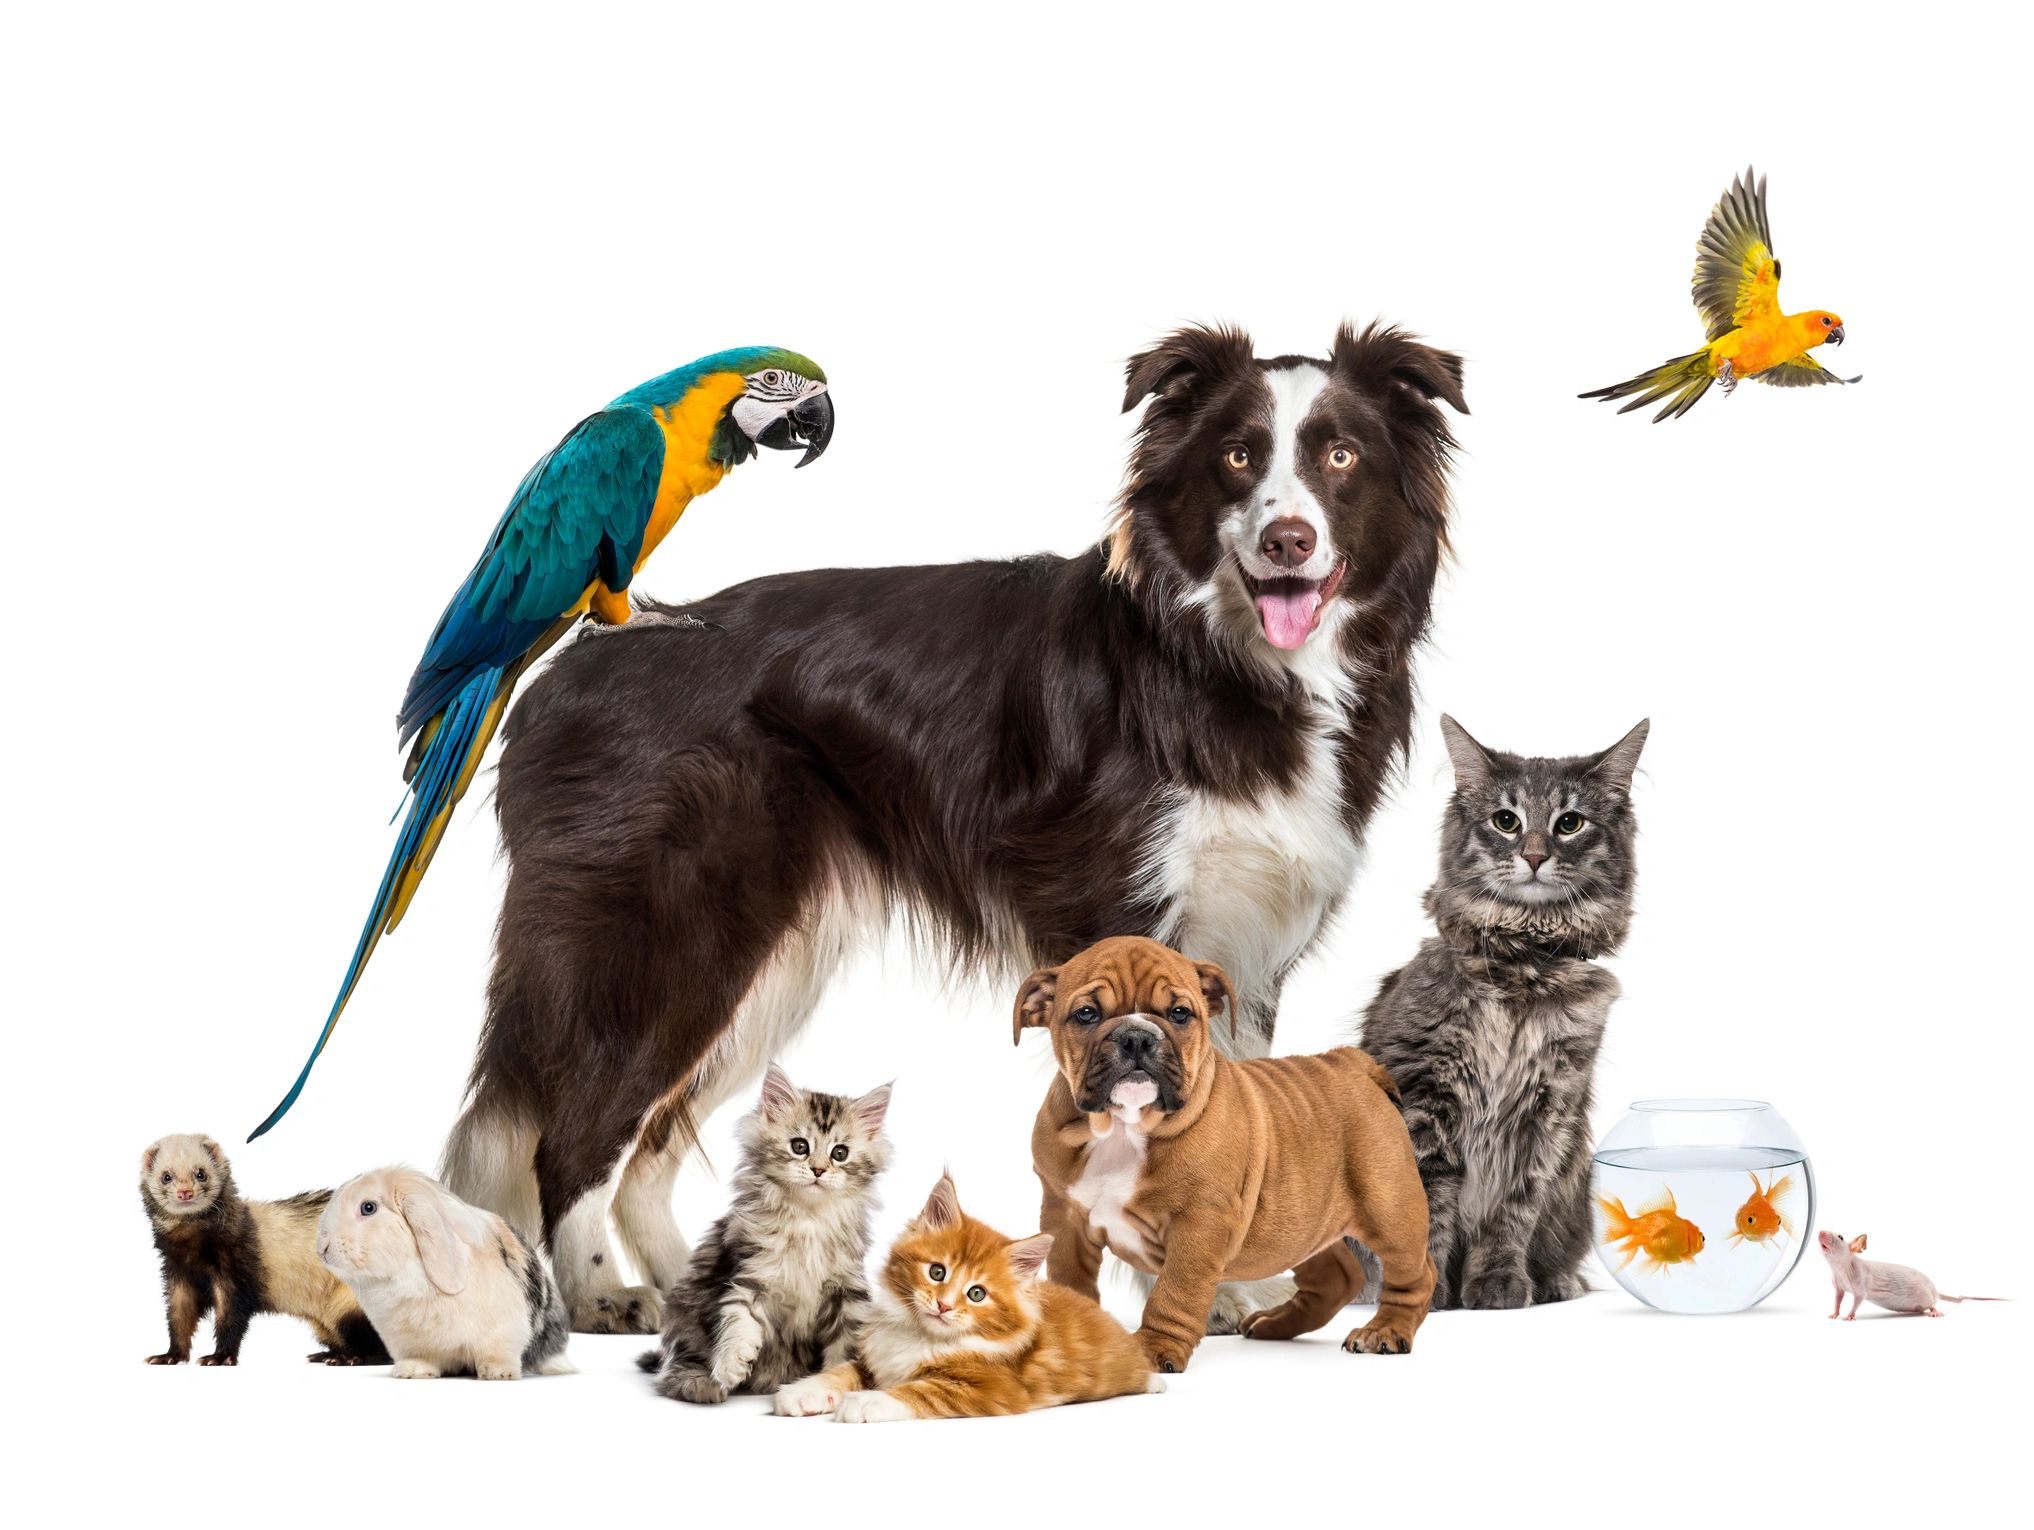 Variety of pets with Macaw Parrot sitting on Border Collie, dog walking and in home pet sitting.